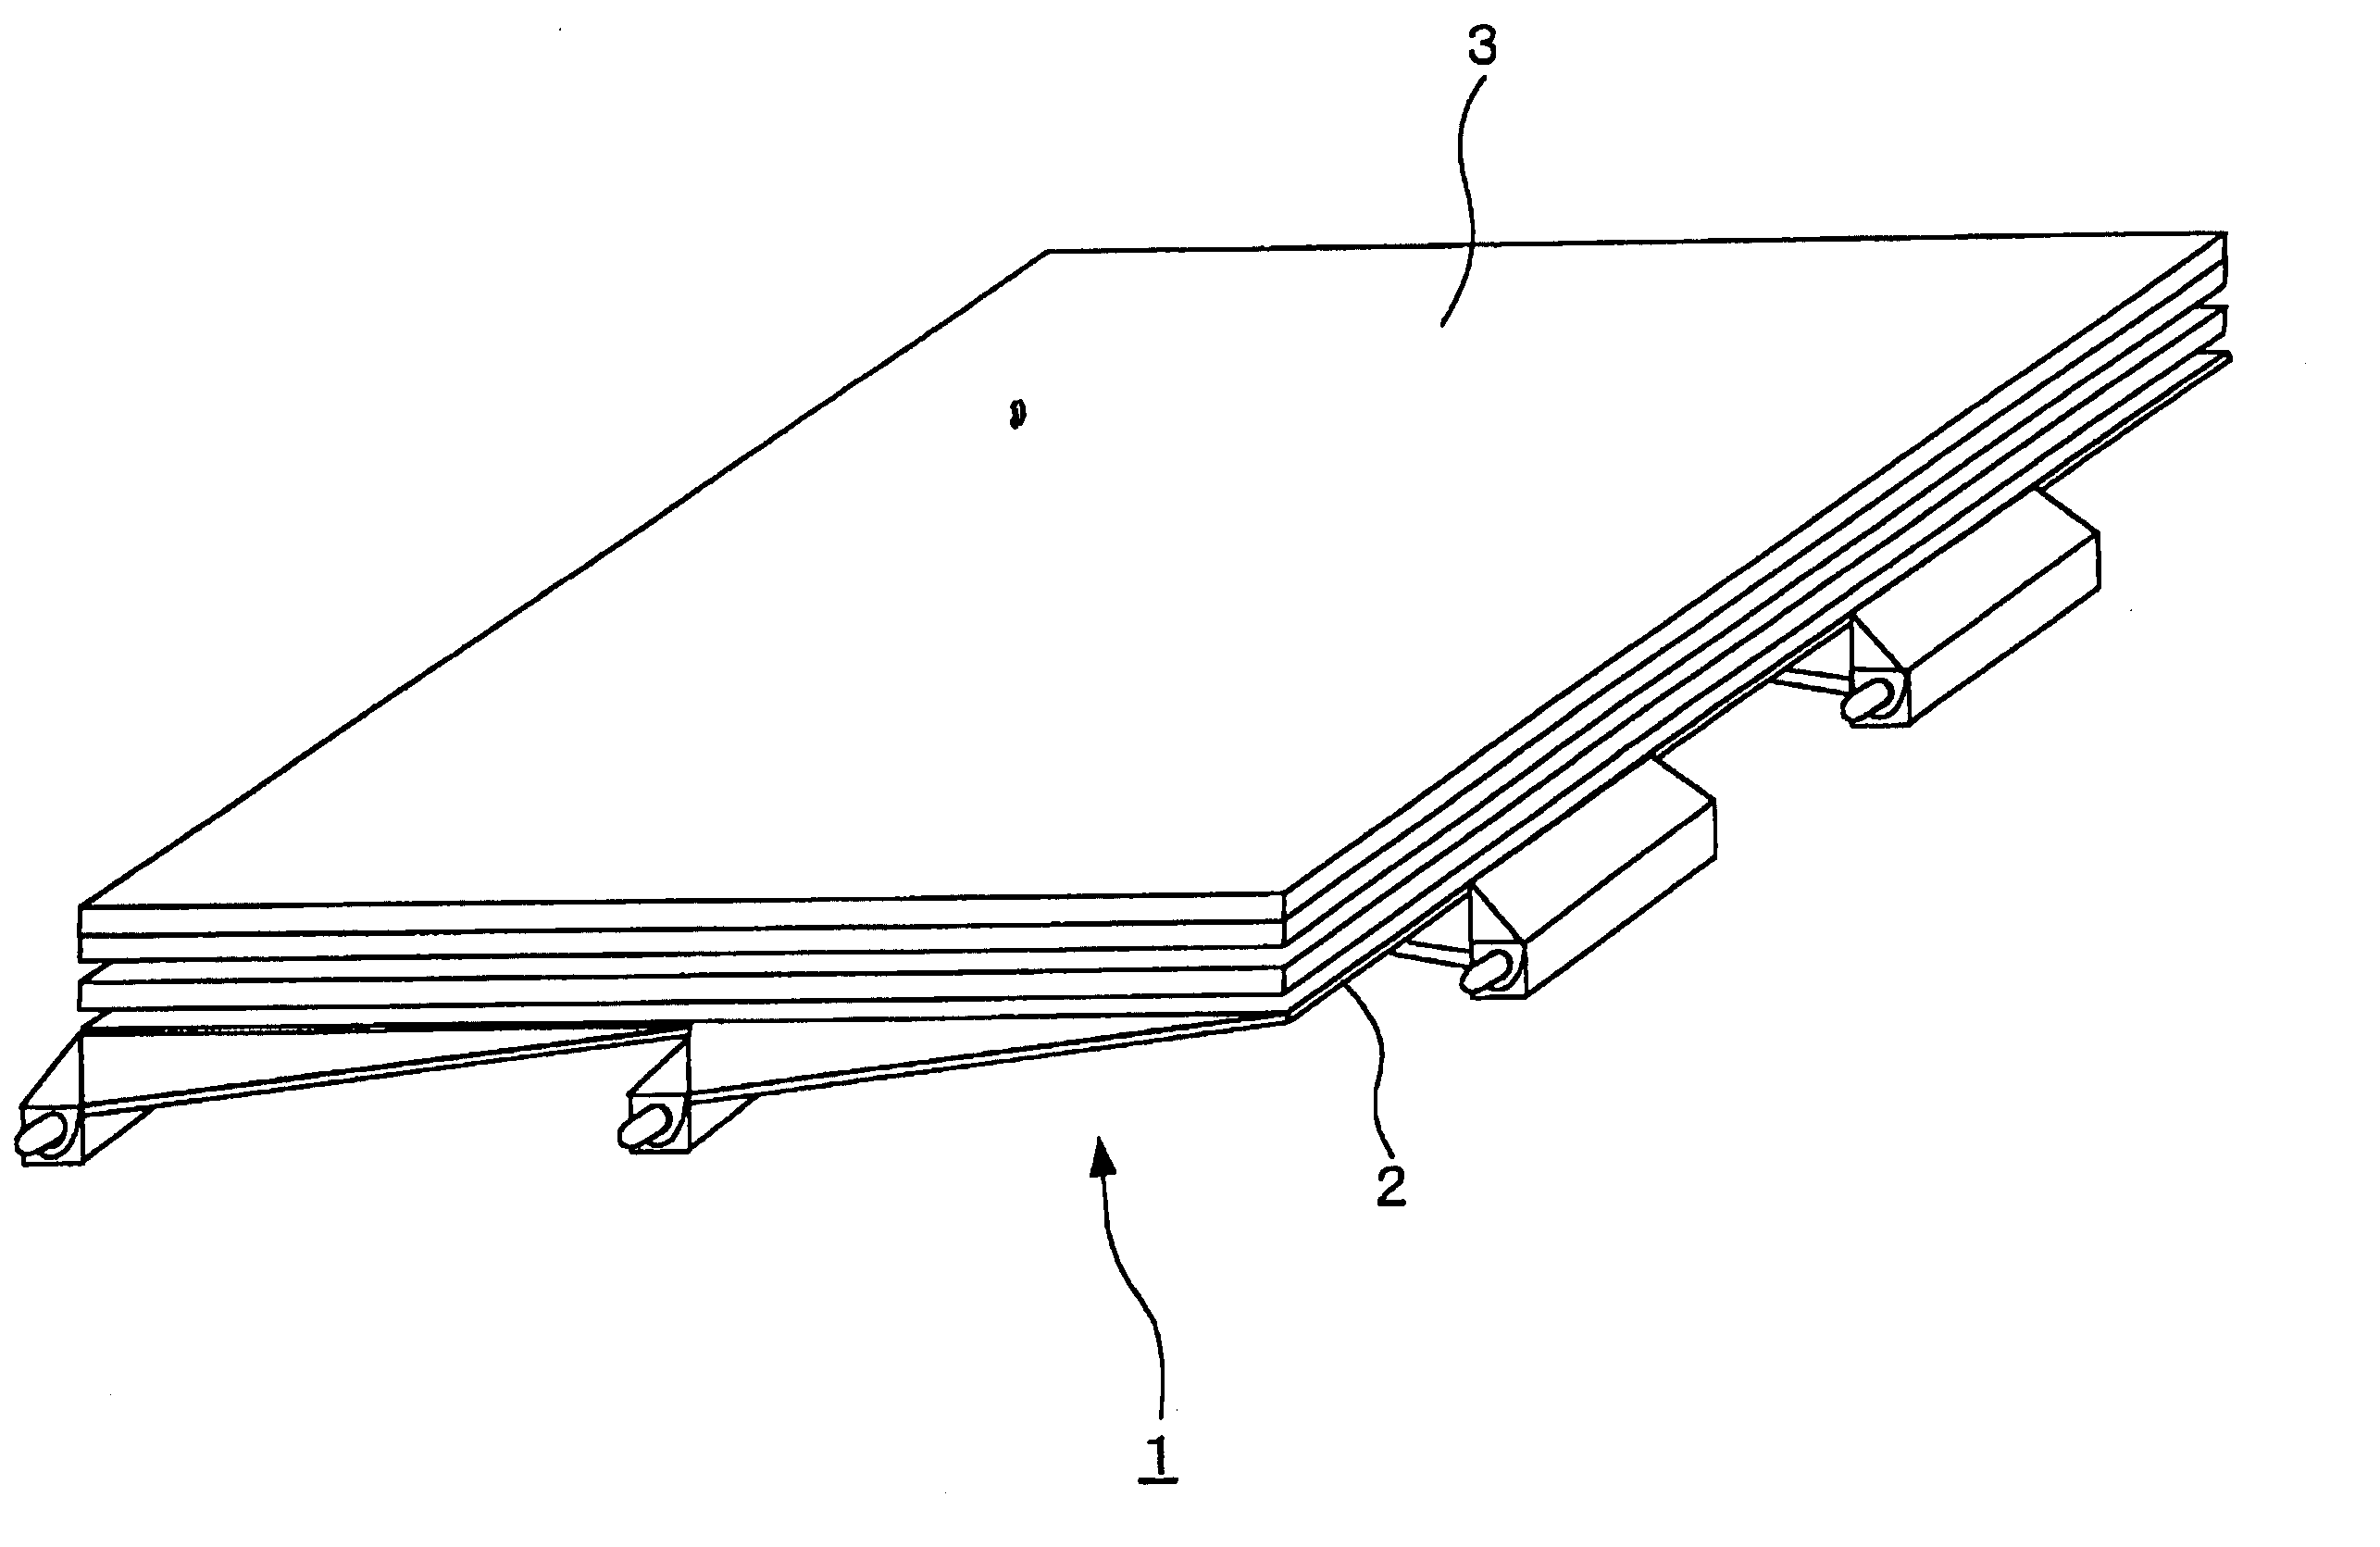 Backlight, backlight drive device and display device